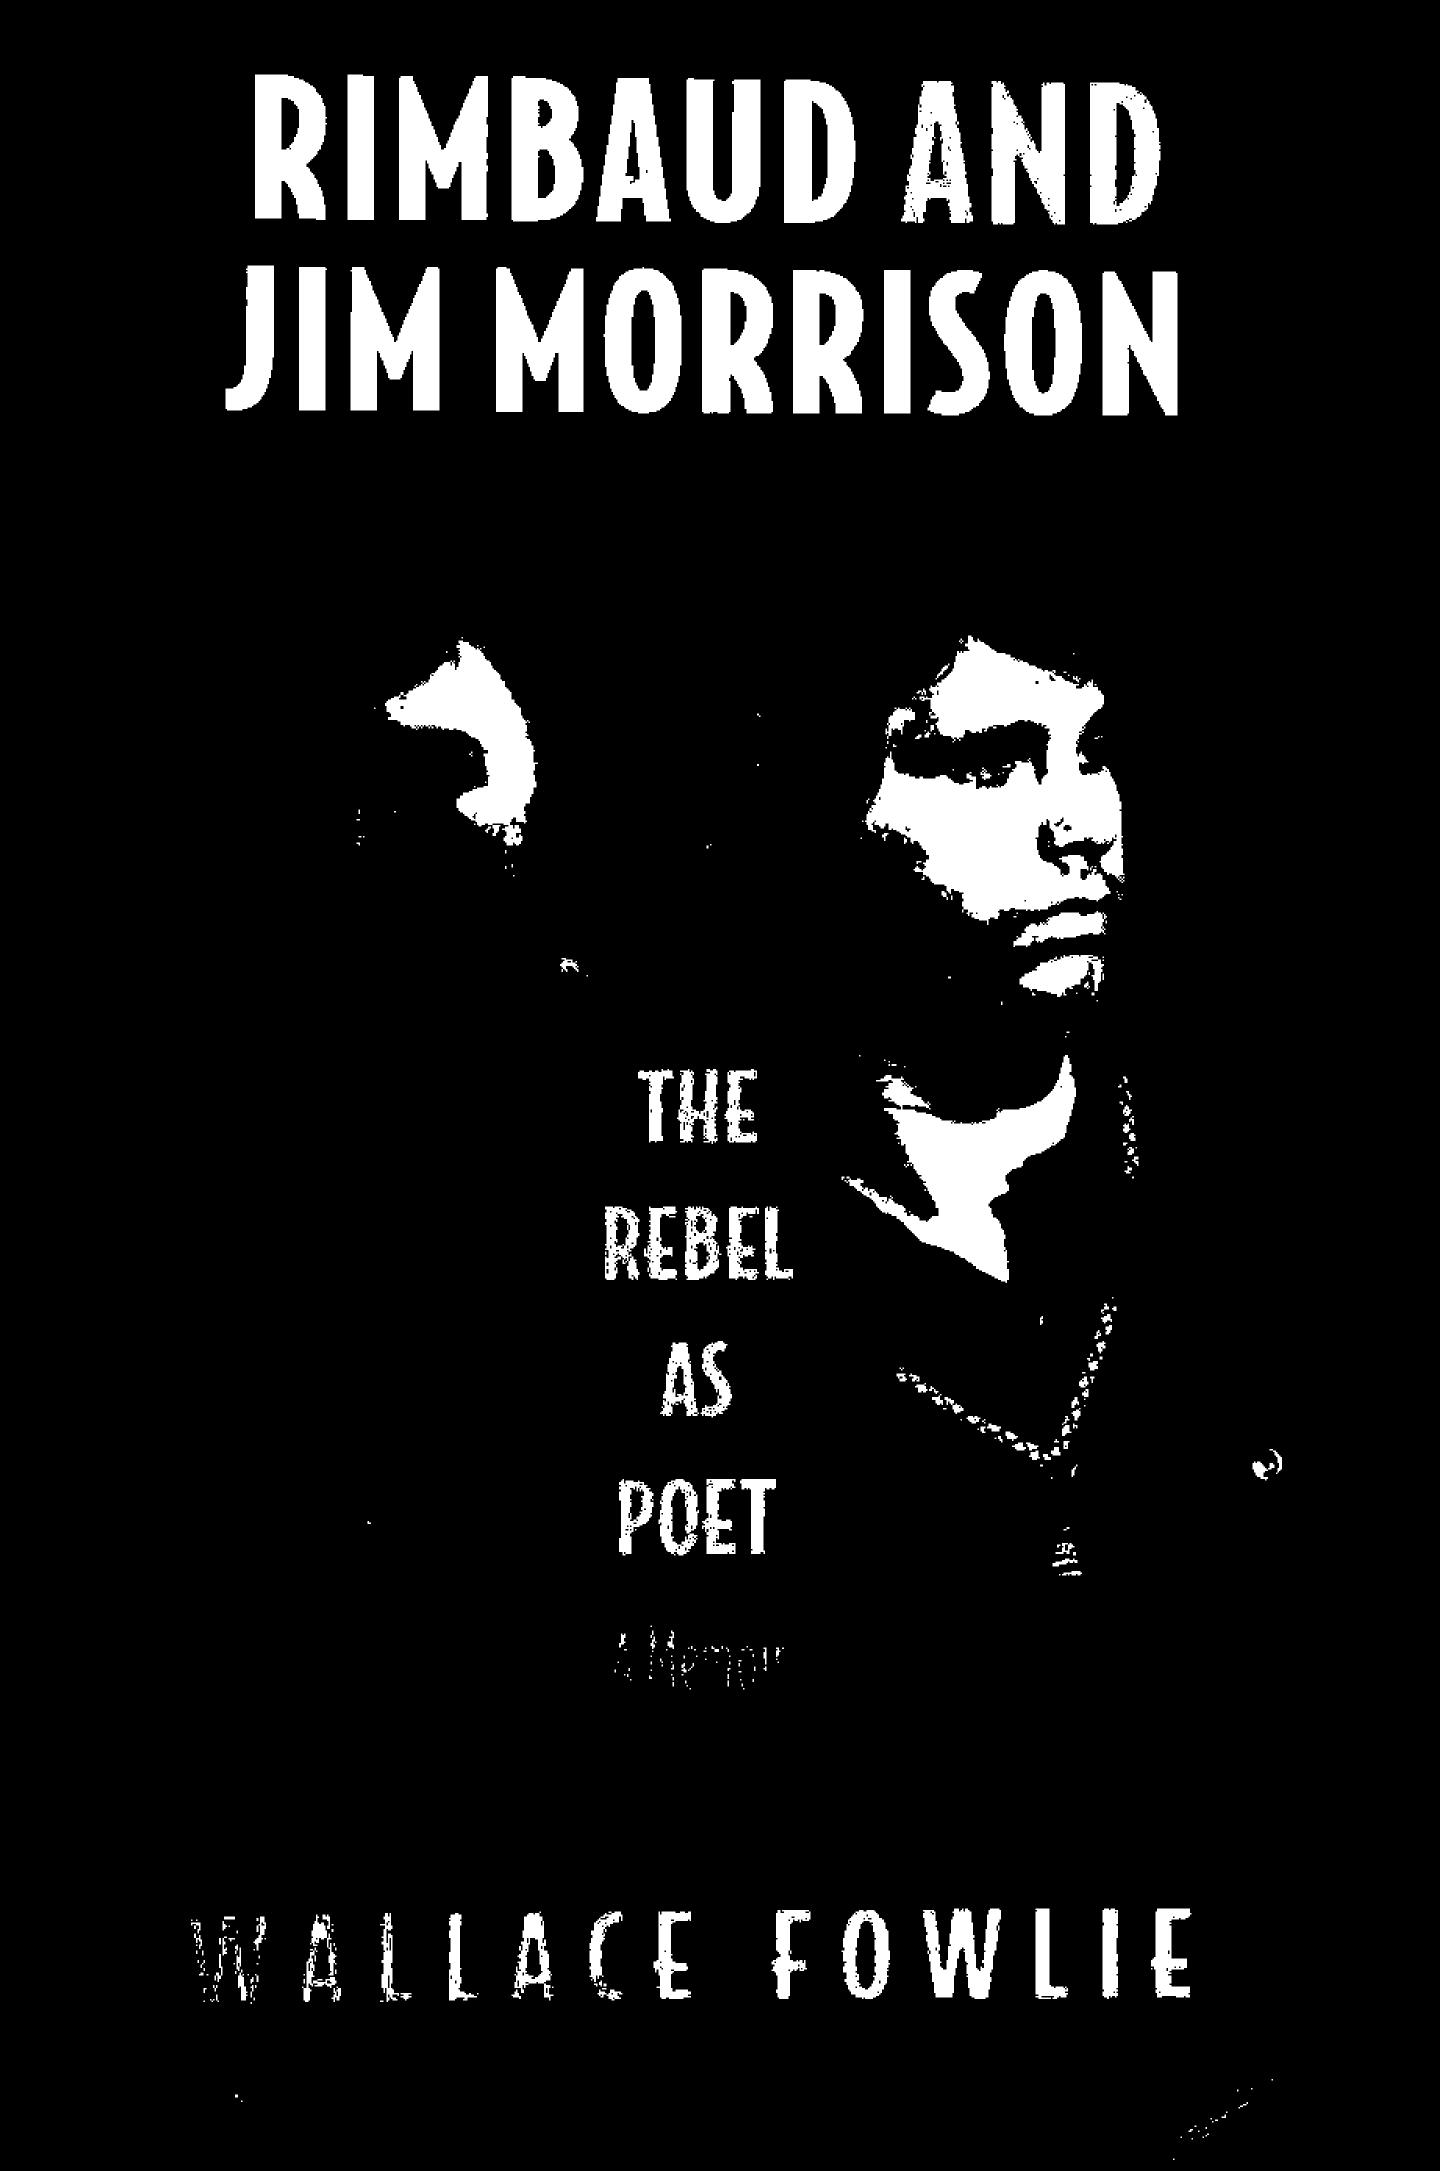 Rimbaud and Jim Morrison, the Rebel as Poet by Wallace Fowlie